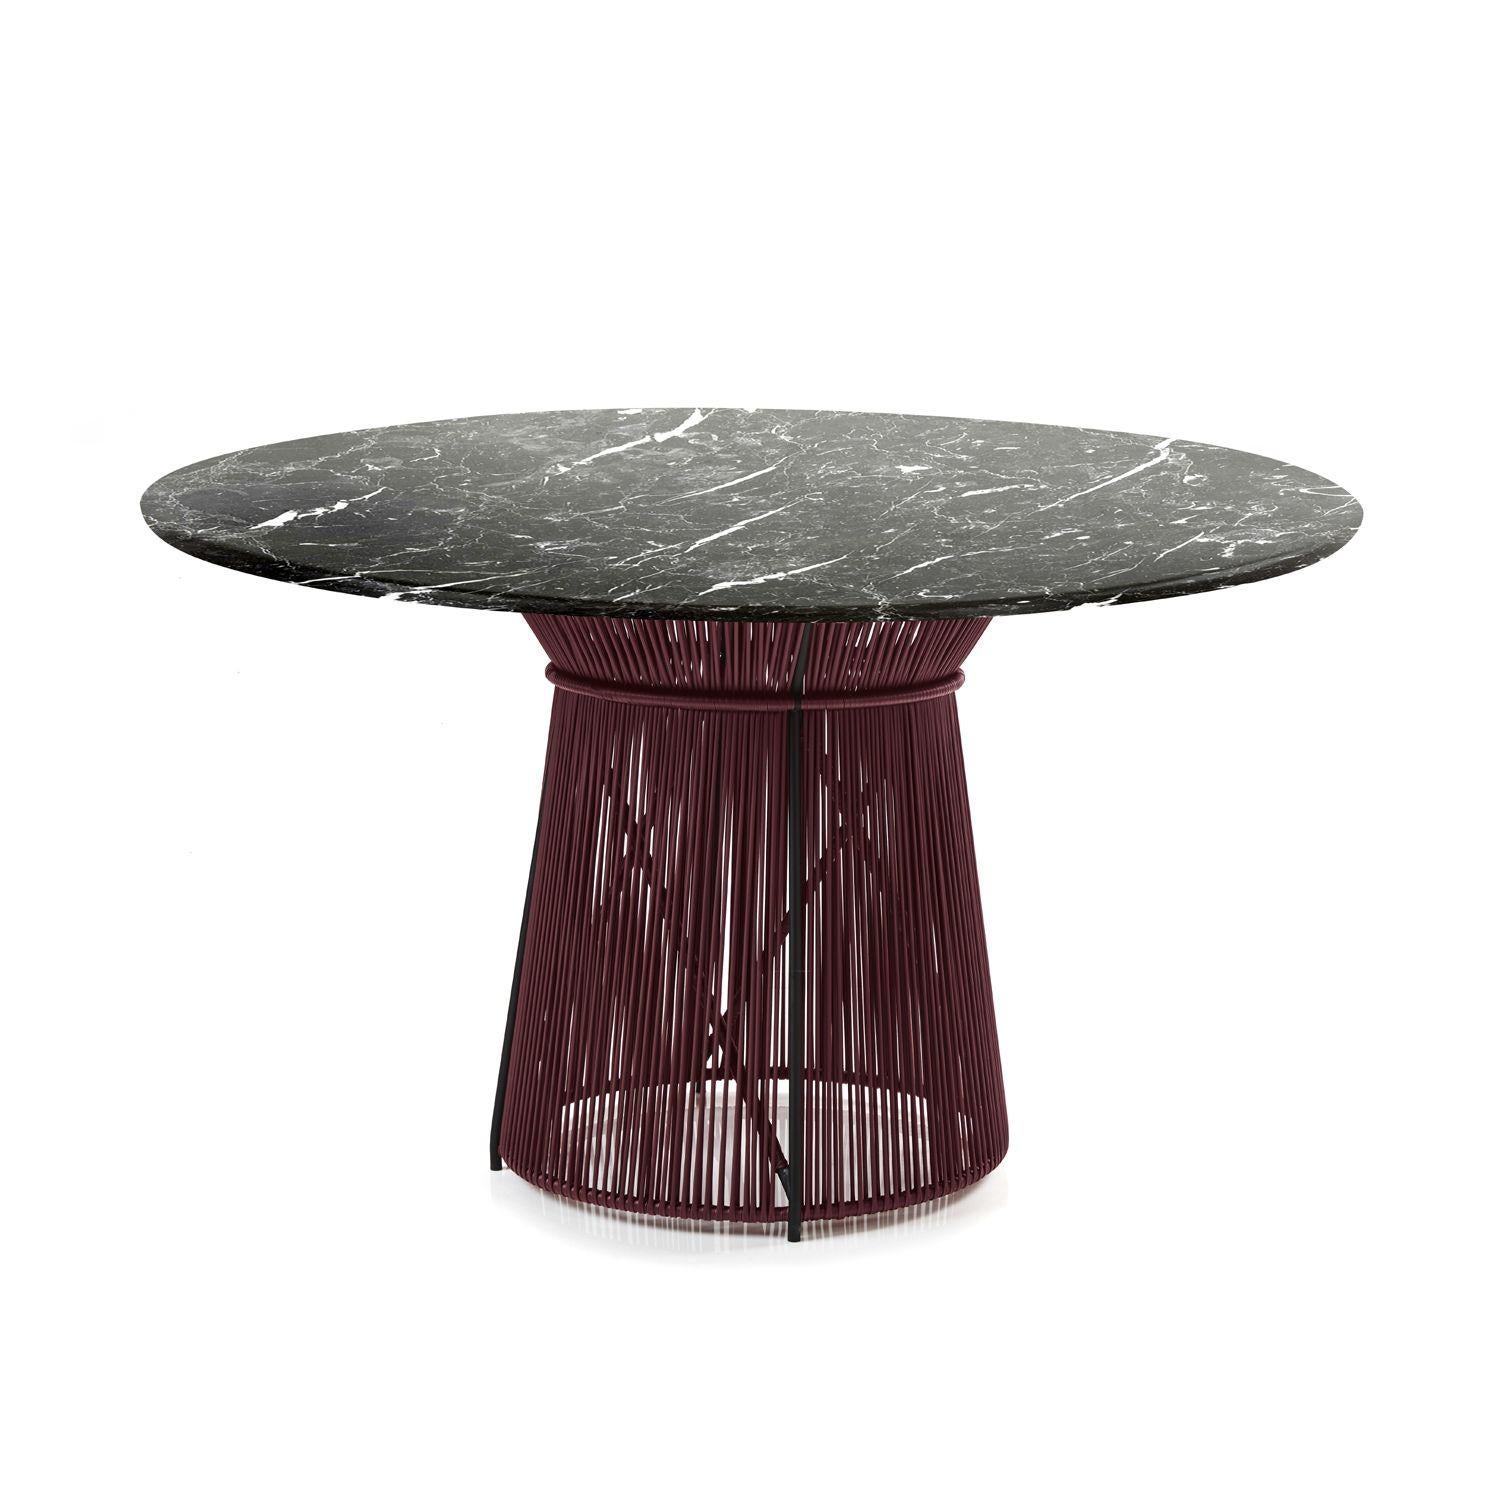 Colombian Ames Caribe Chic Marble Indoor and Outdoor Table by Sebastian Herkner For Sale